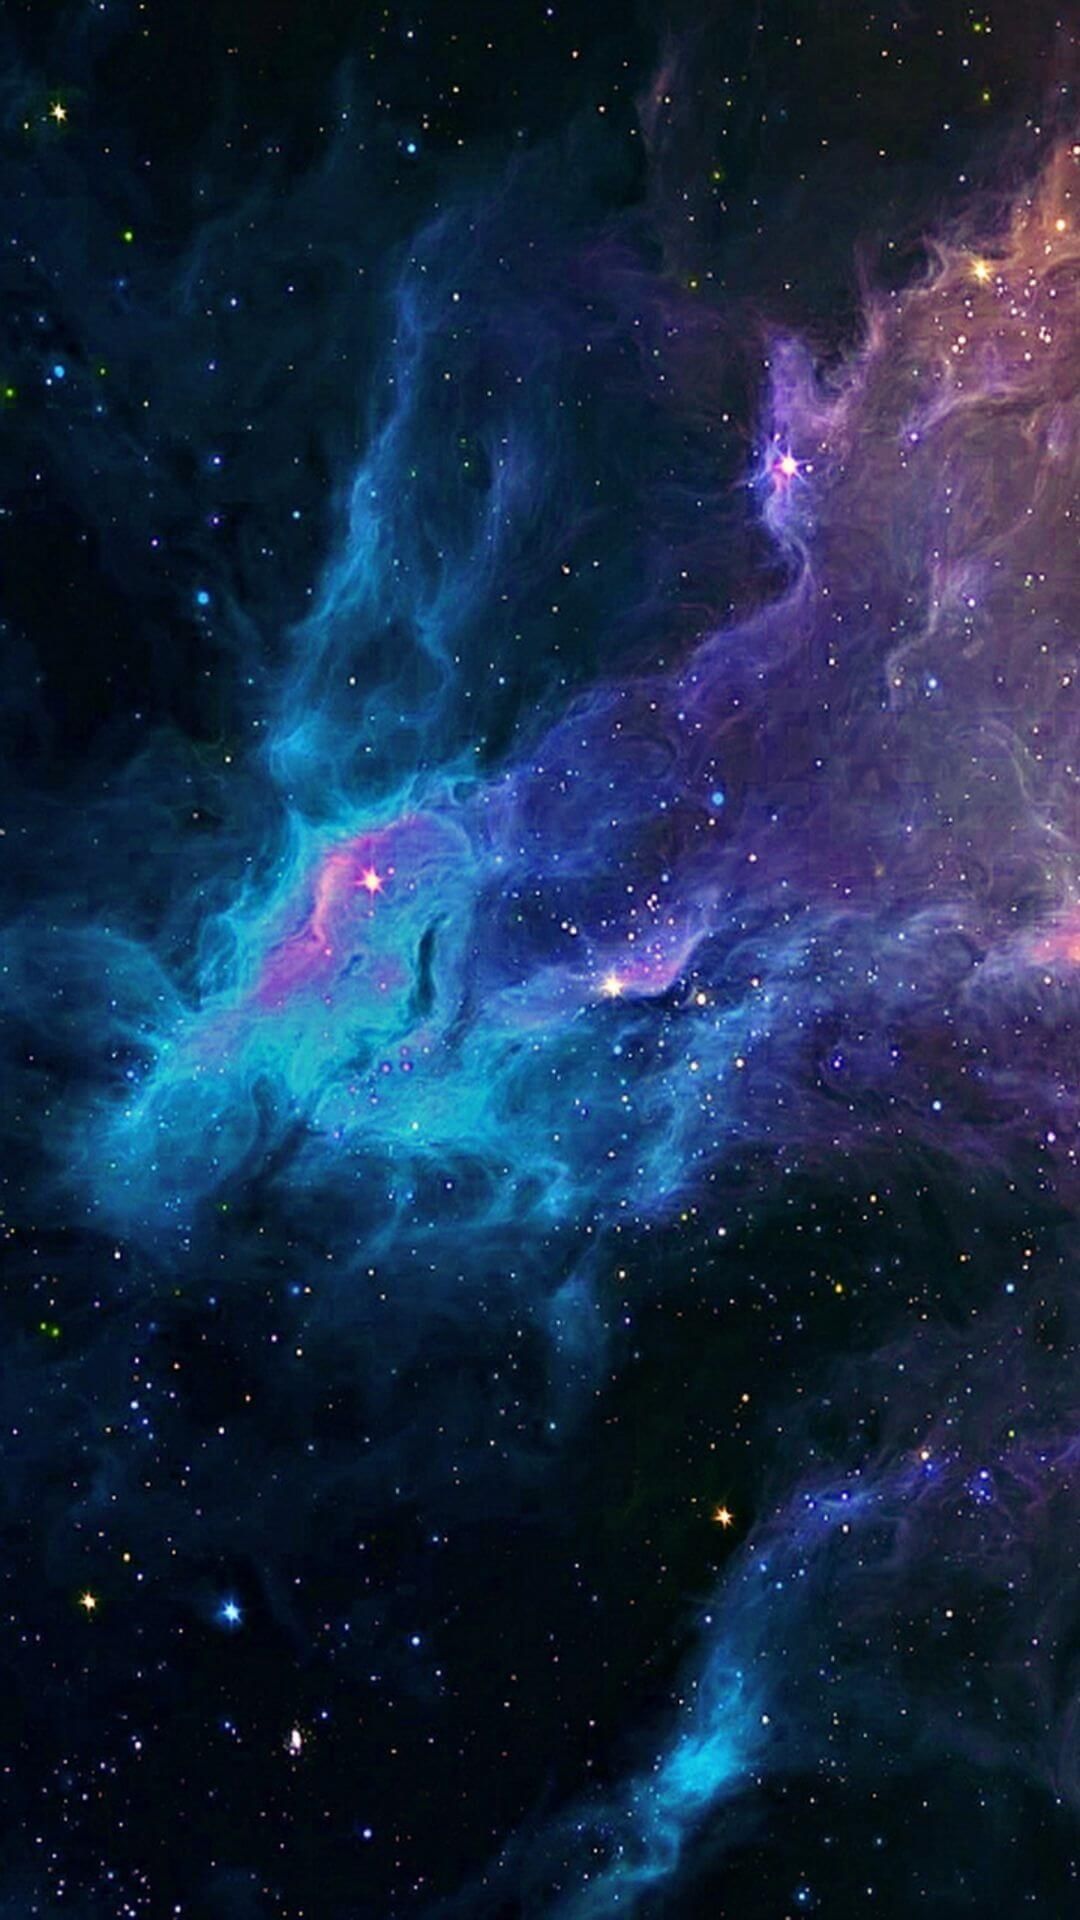 A space wallpaper with nebulae - Galaxy